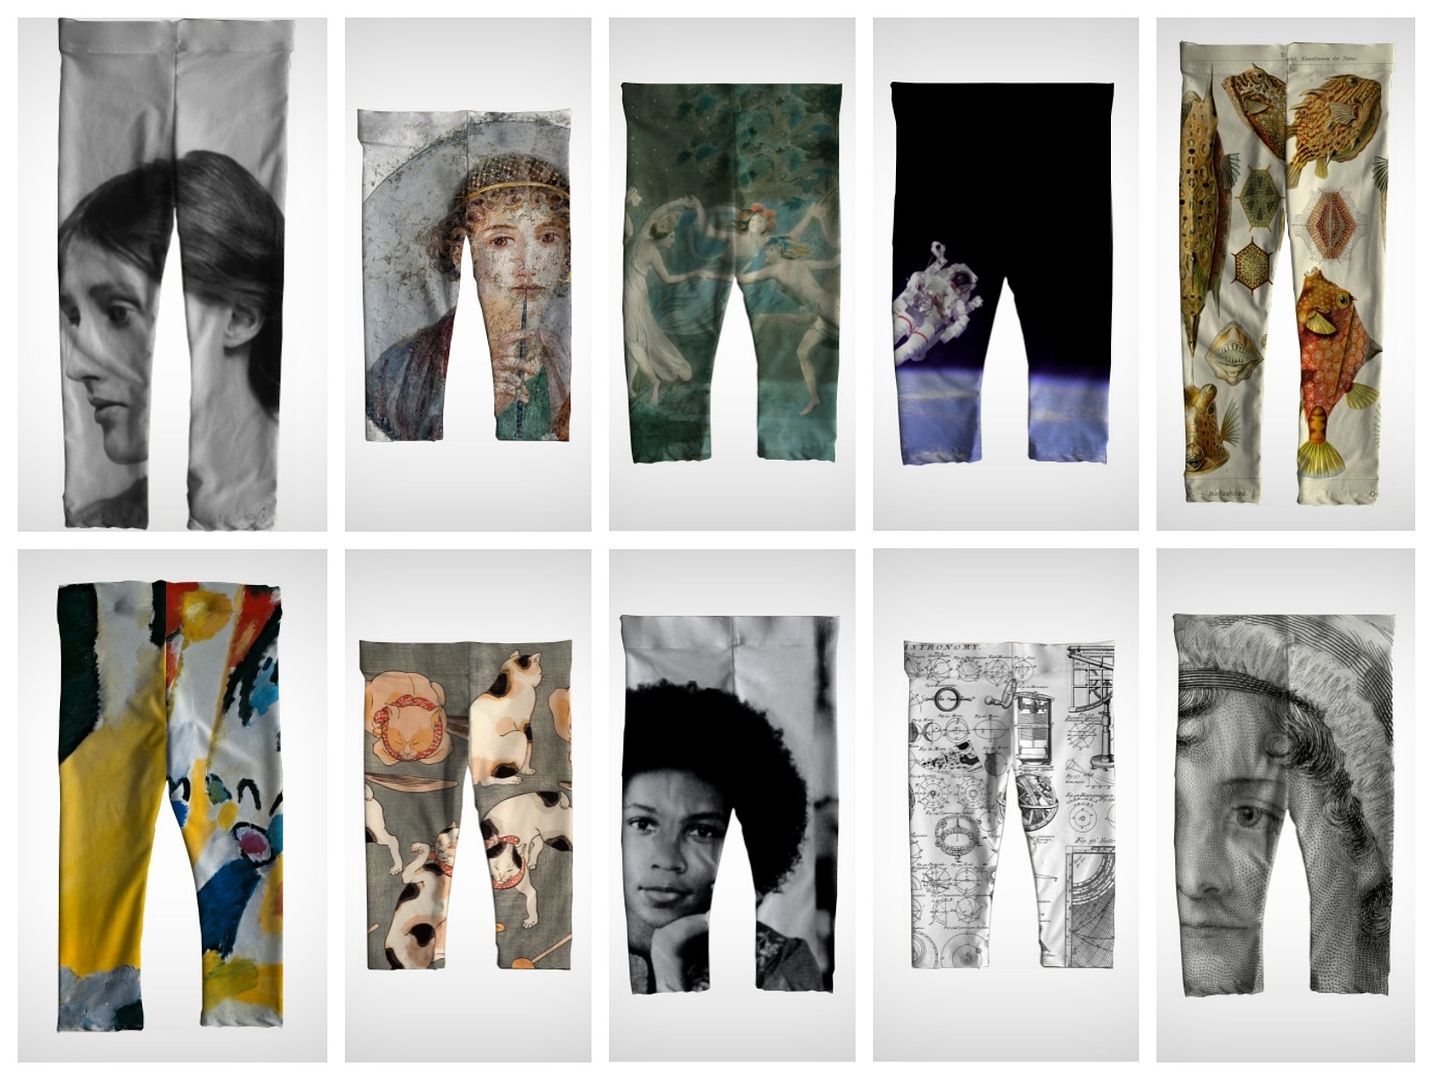 Famous women and art make great pants!